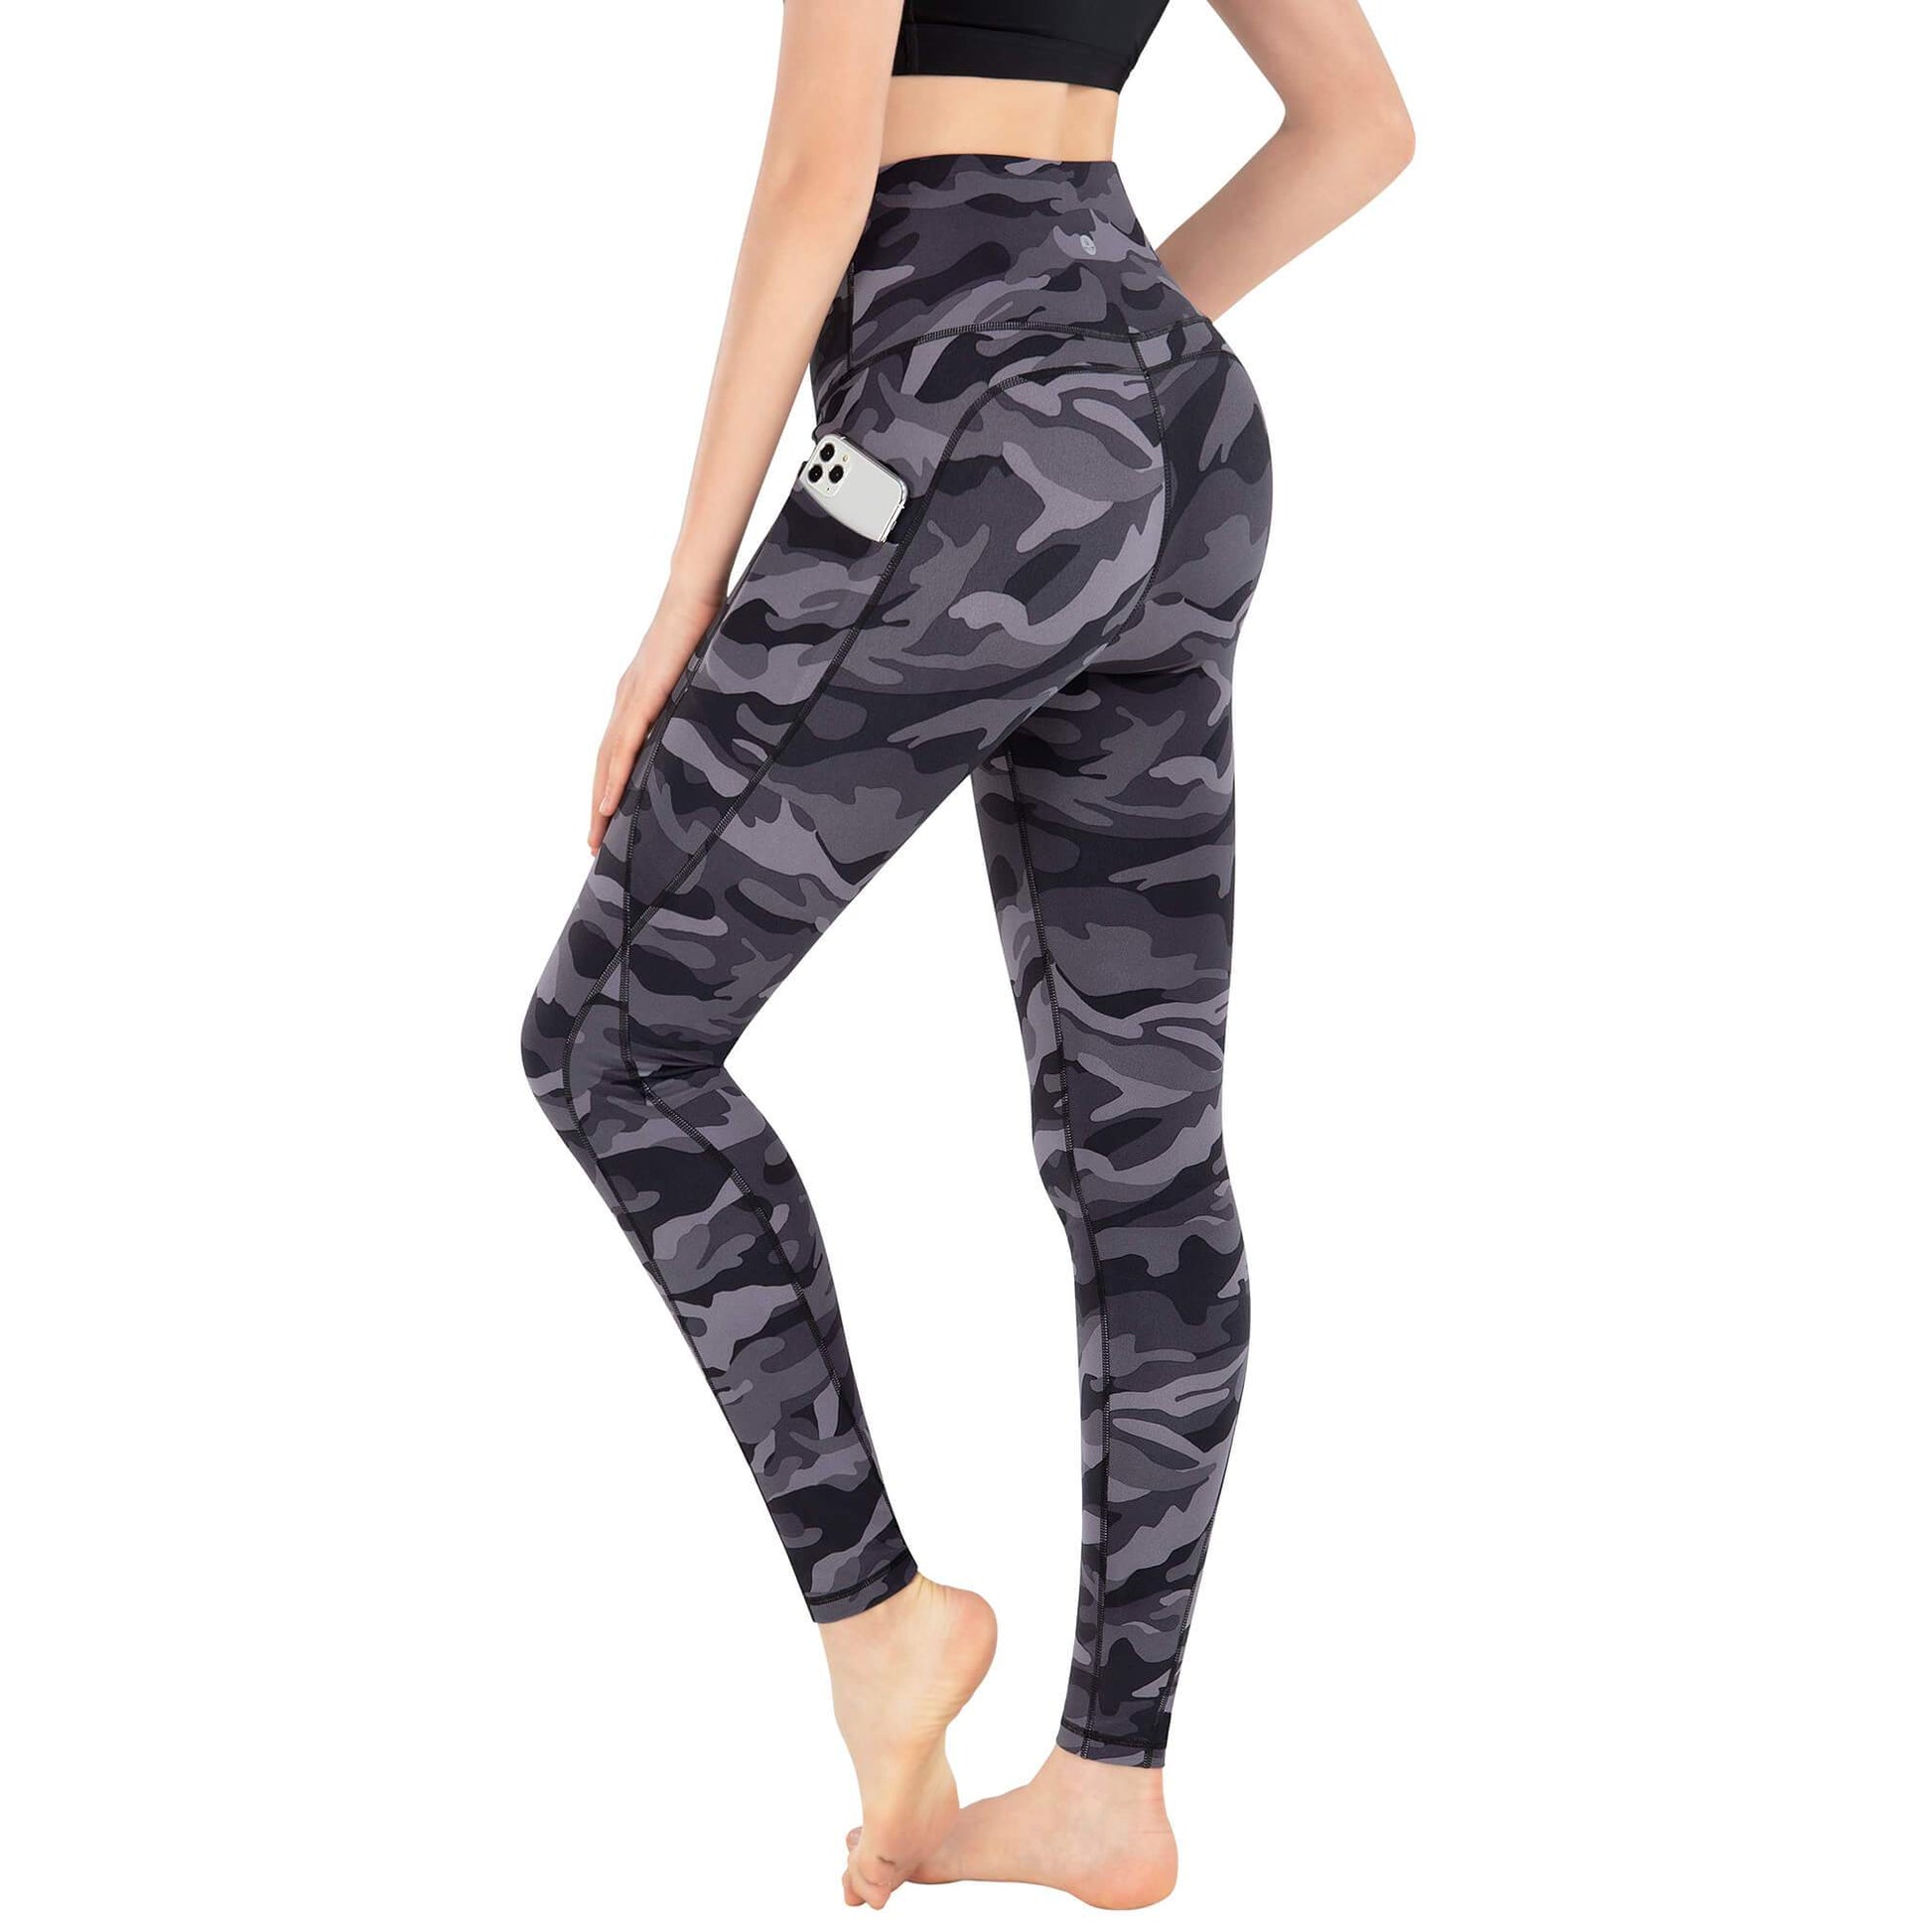 Girls, are you still wearing yoga pants at the gym? – ikeepyoga